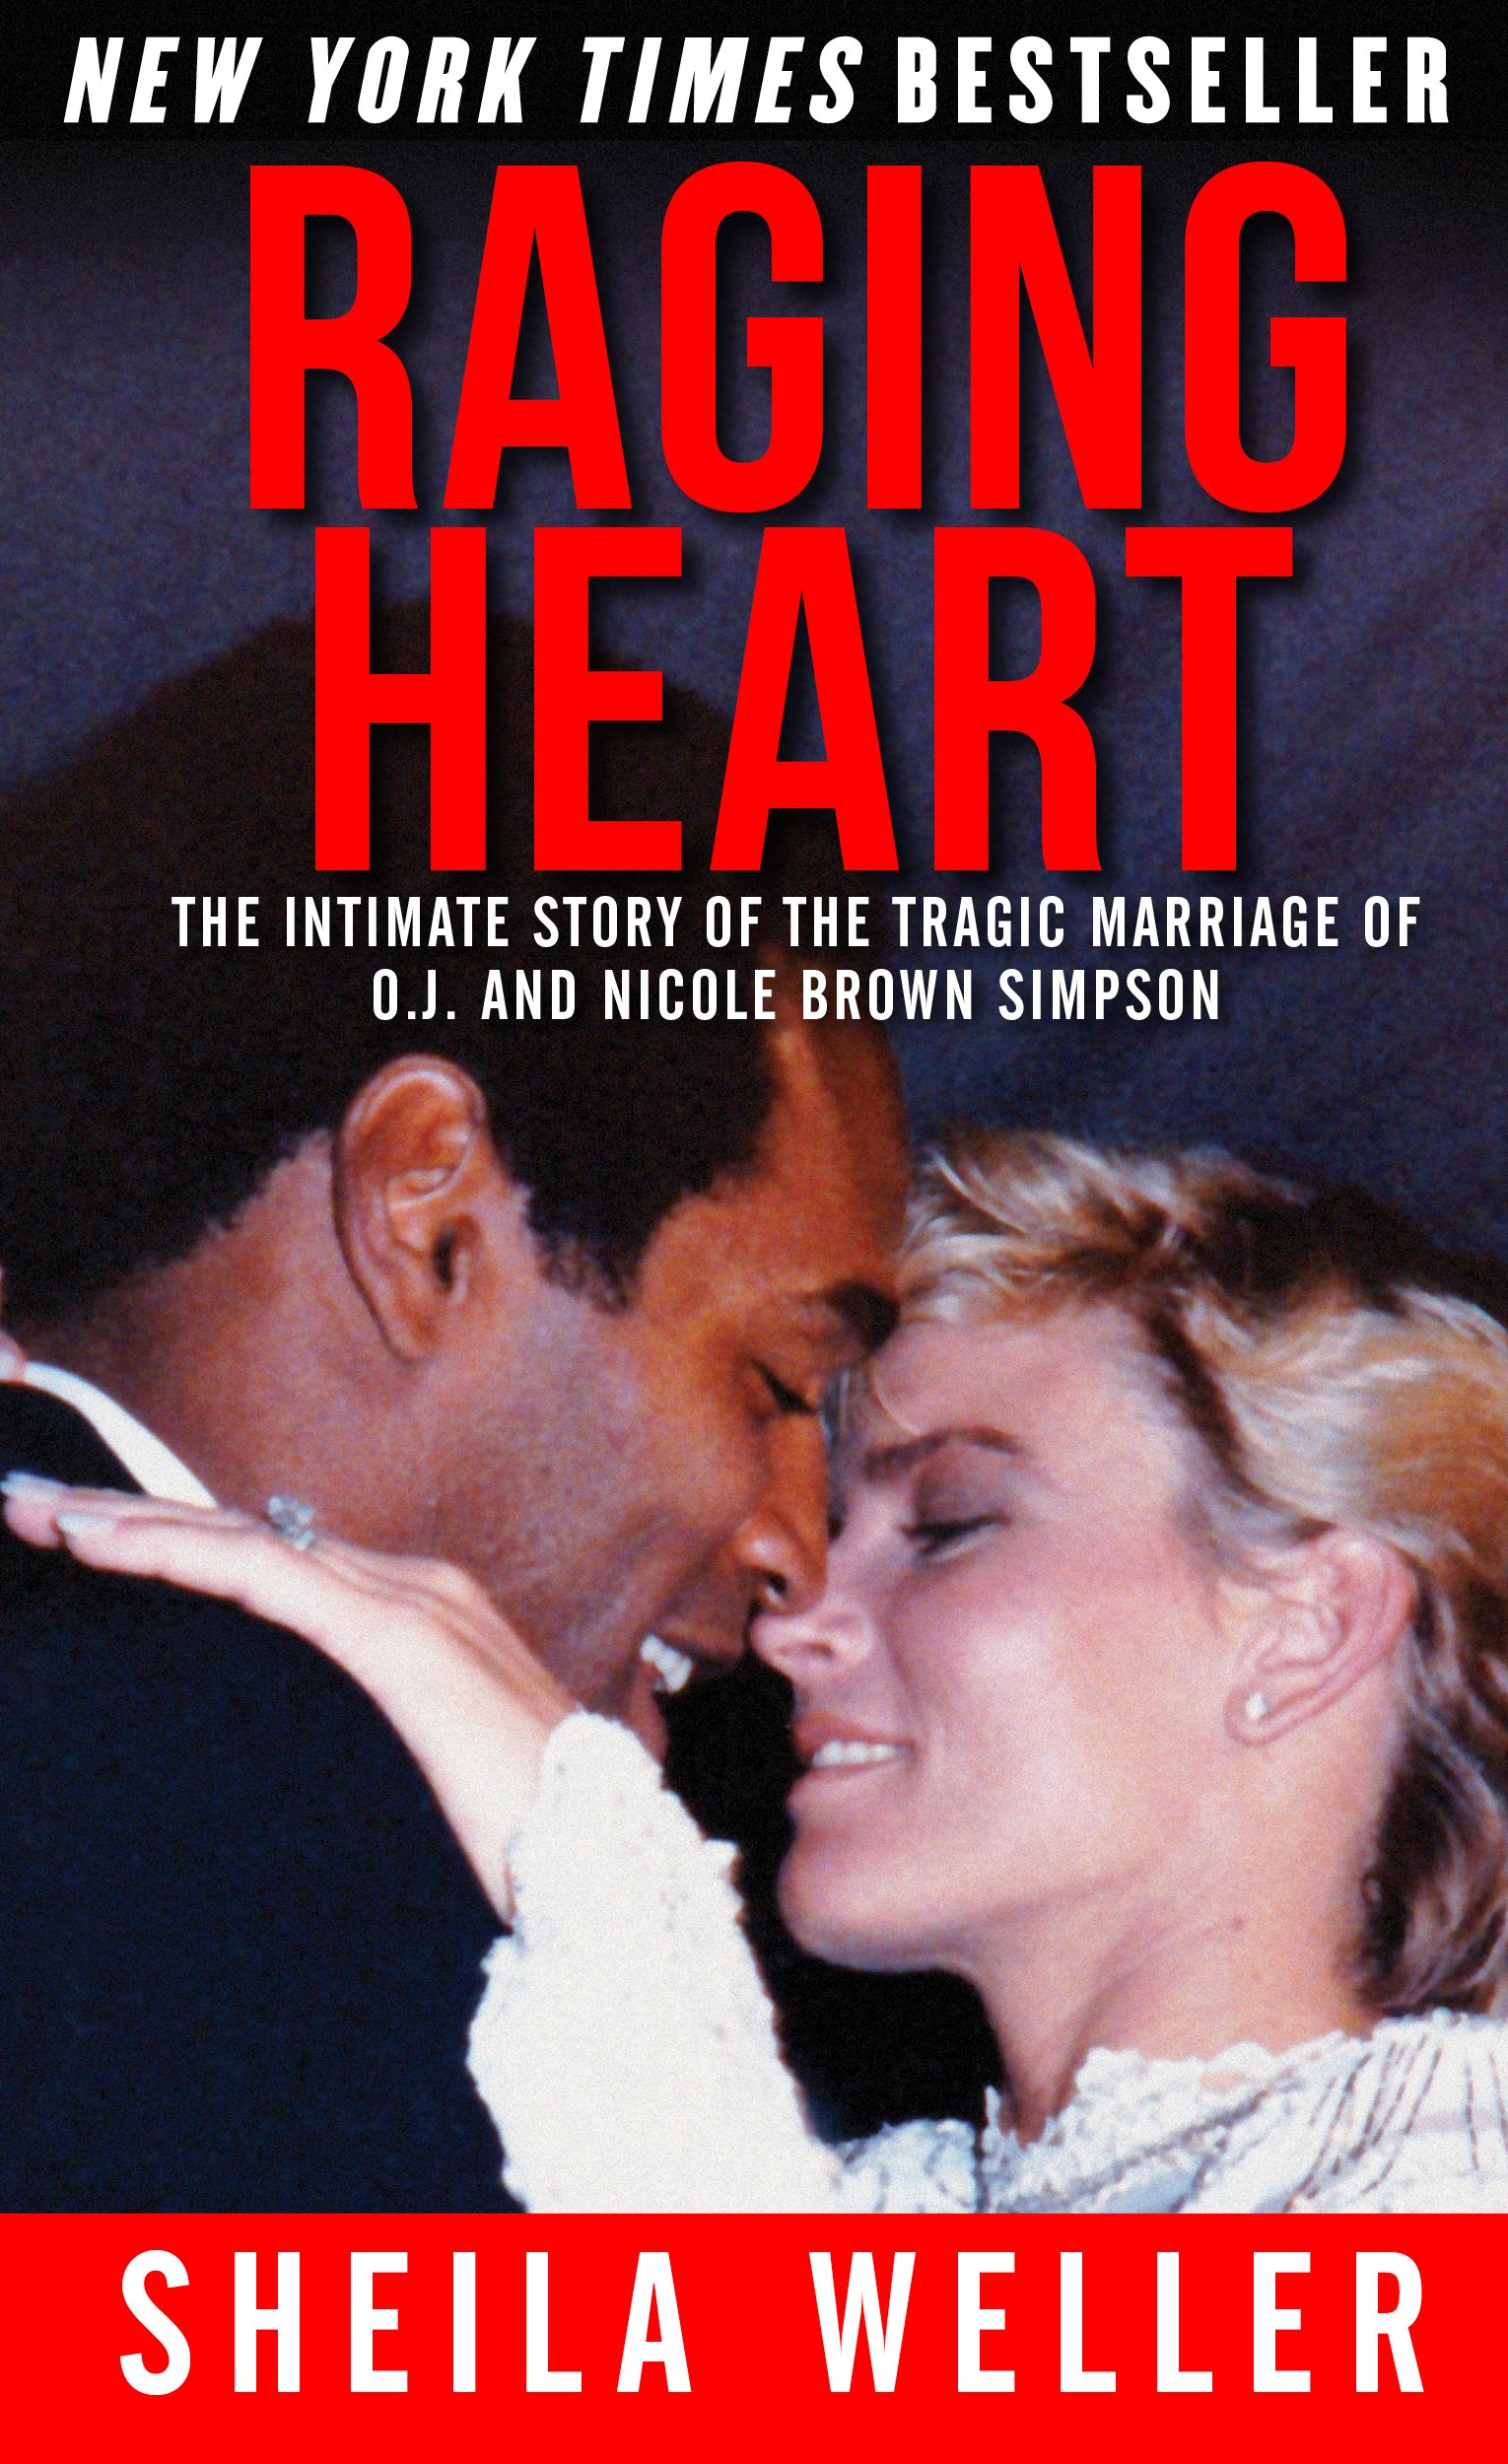 Raging Heart: The Intimate Story of the Tragic Marriage of O. J. and Nicole Brown Simpson